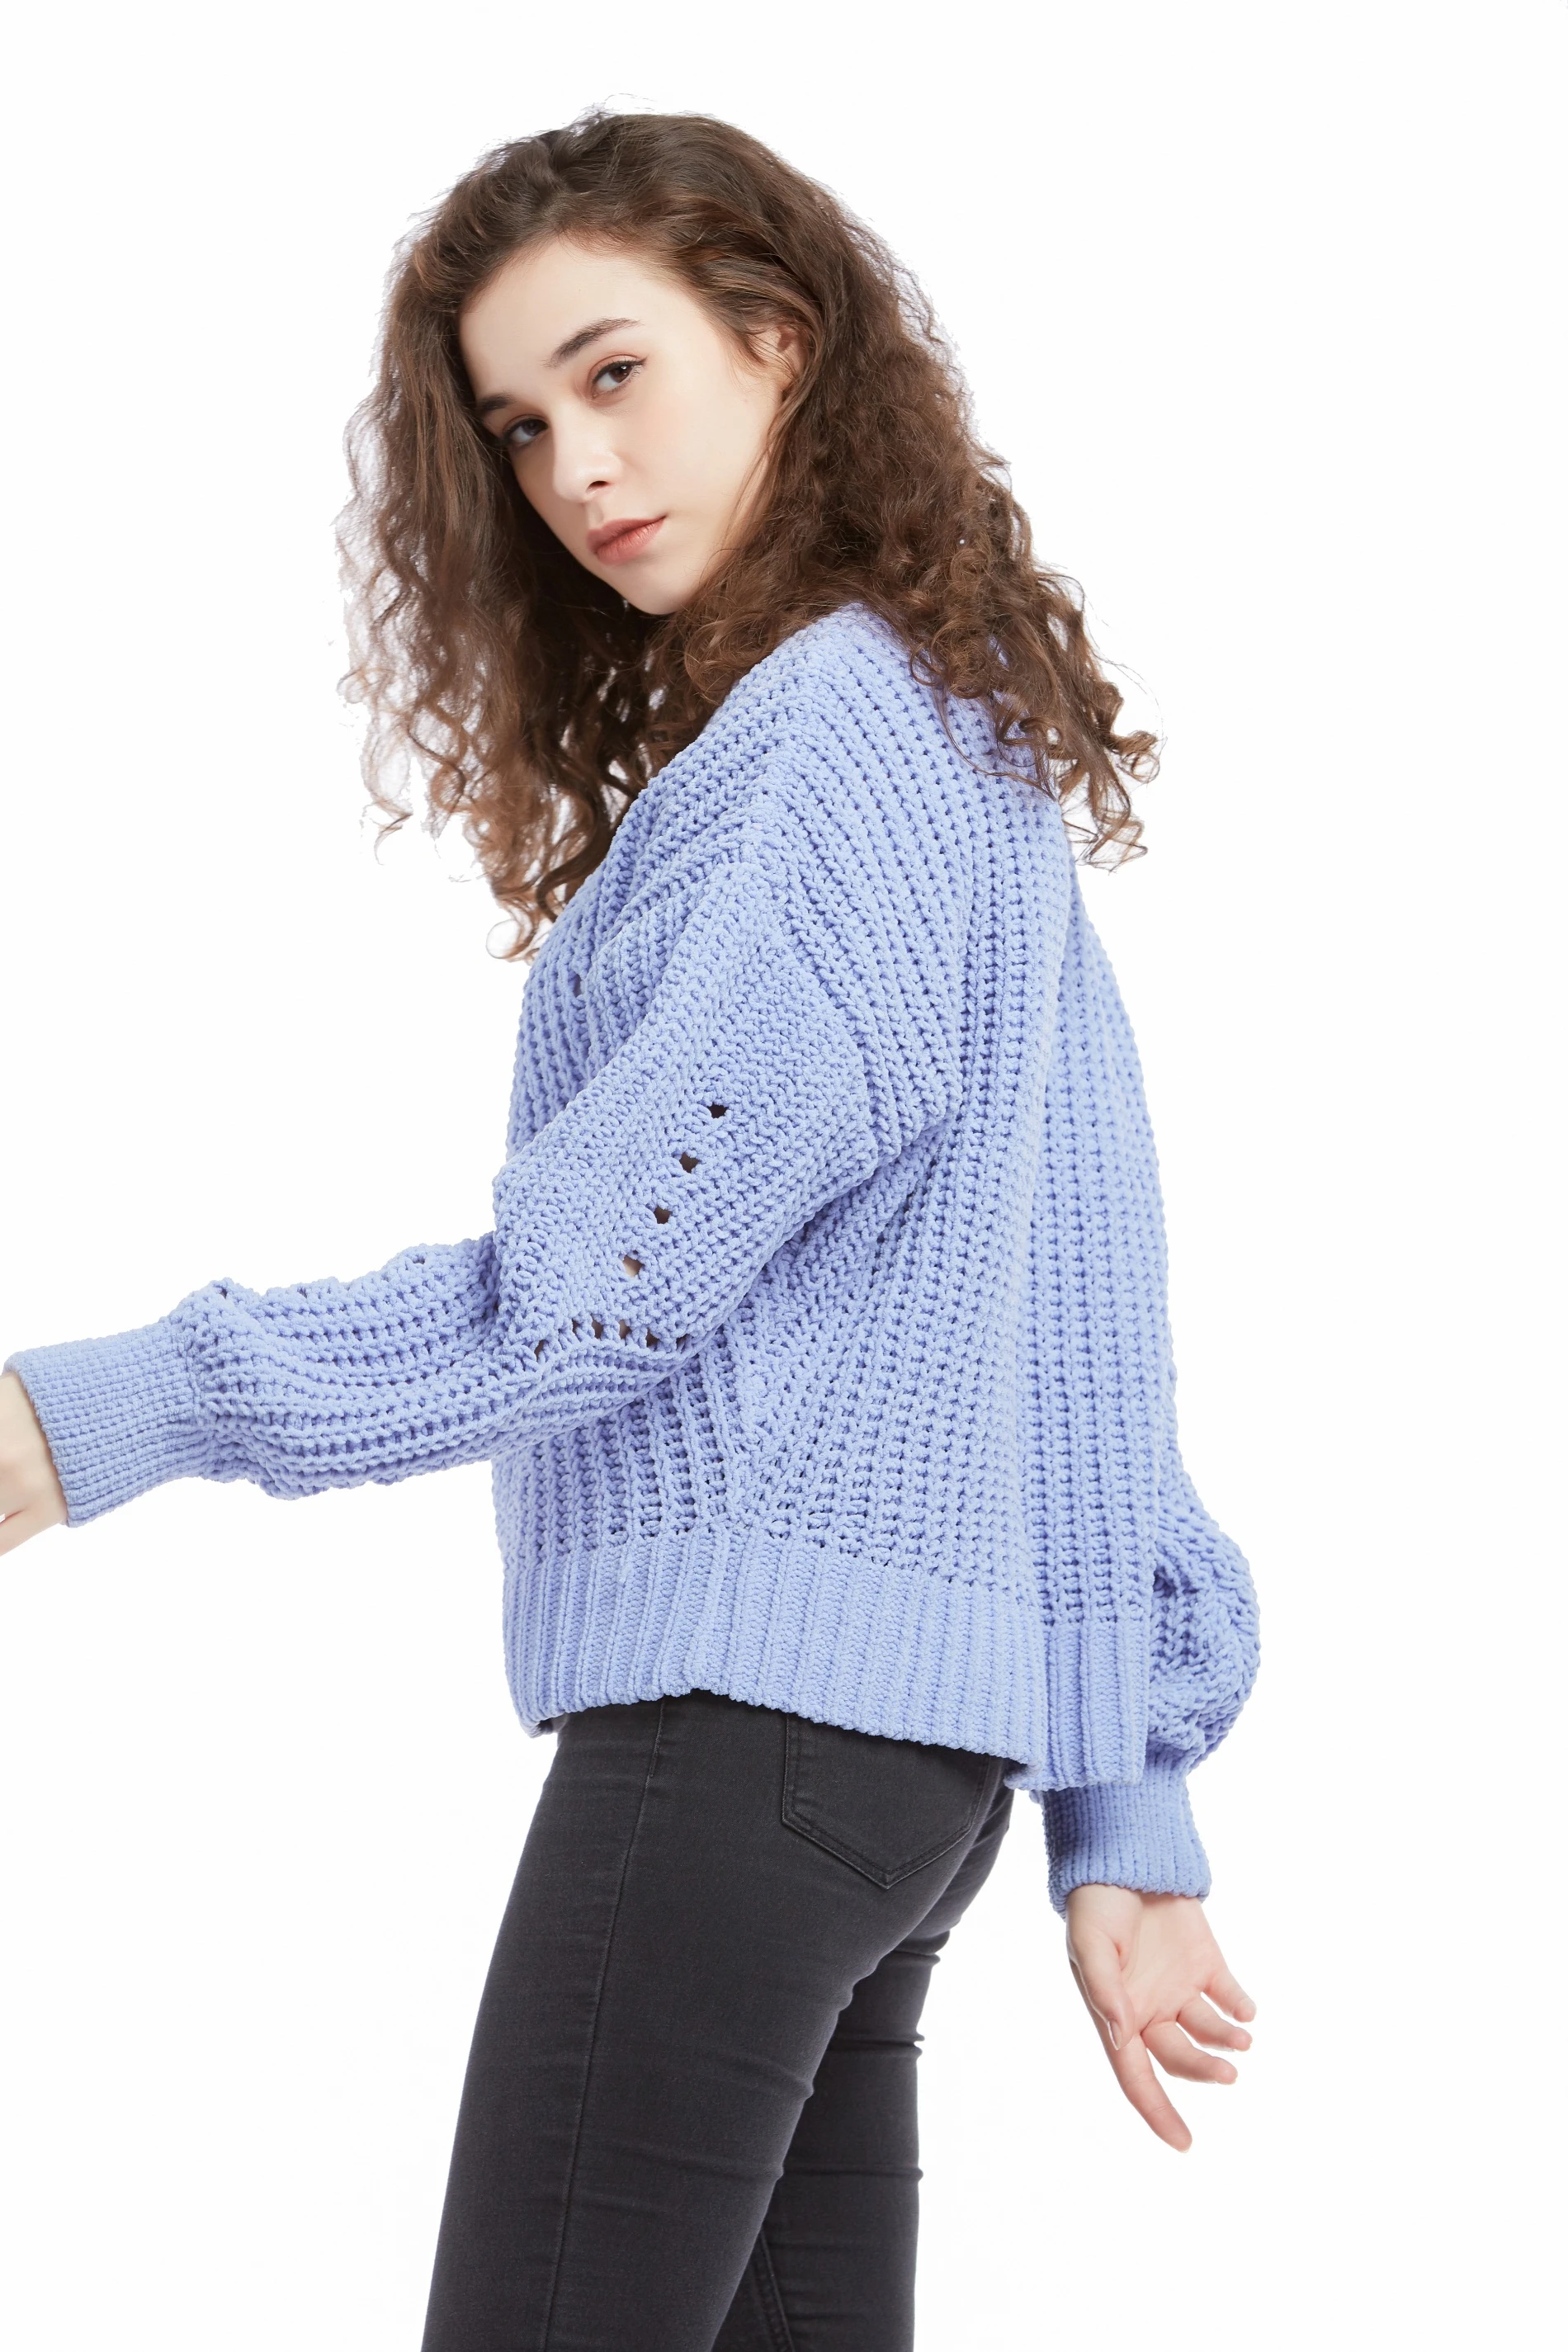 OEM Women Comfy Long Sleeve Knitwear Hollow Out Sweater Pullover